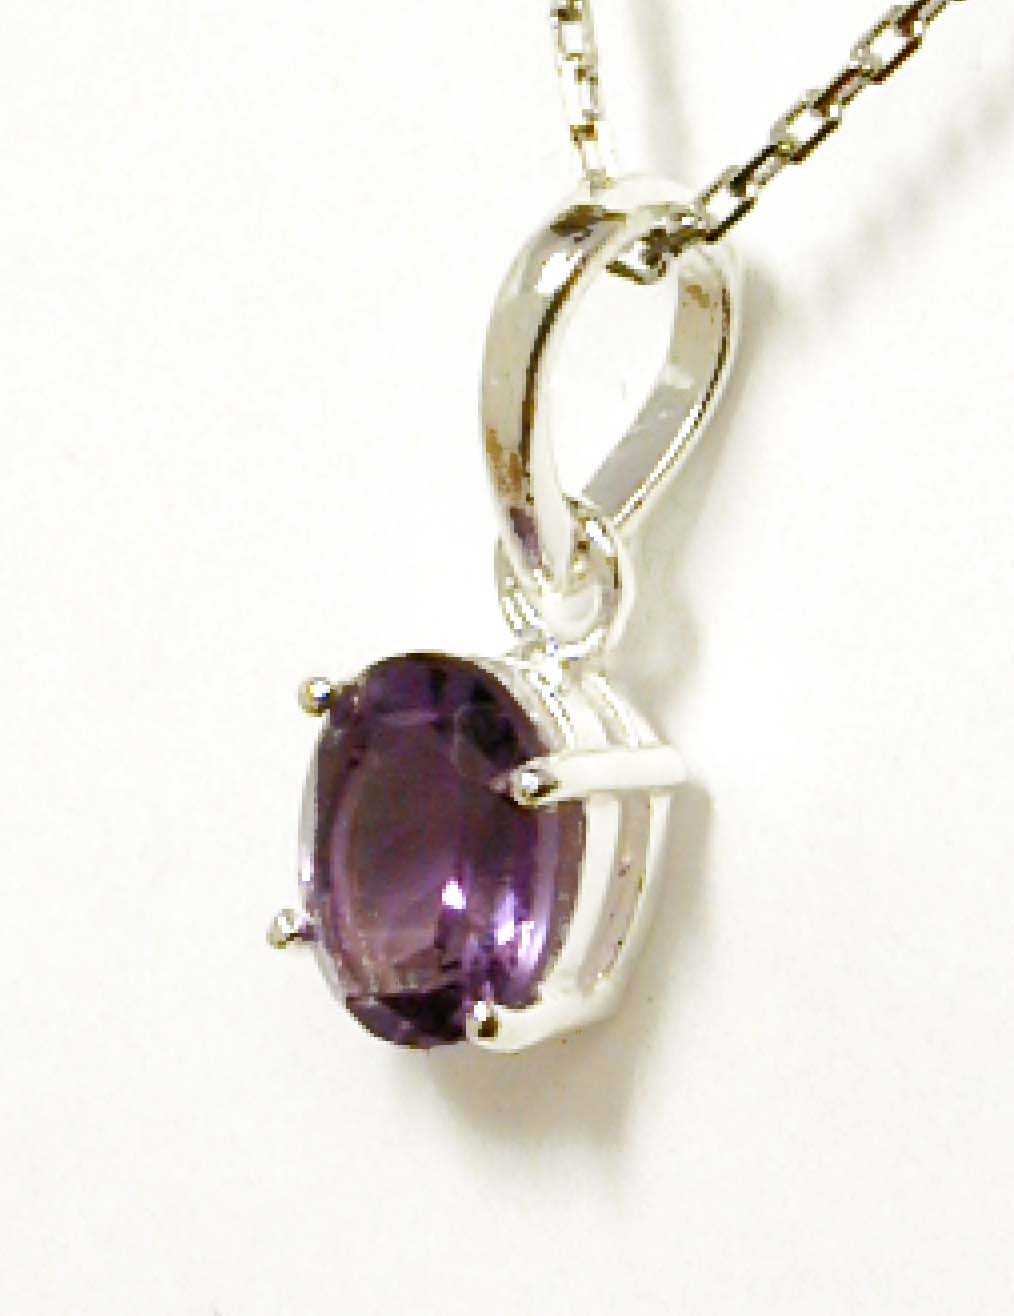 
Oval 8x6mm Amethyst Solitaire Pendant
